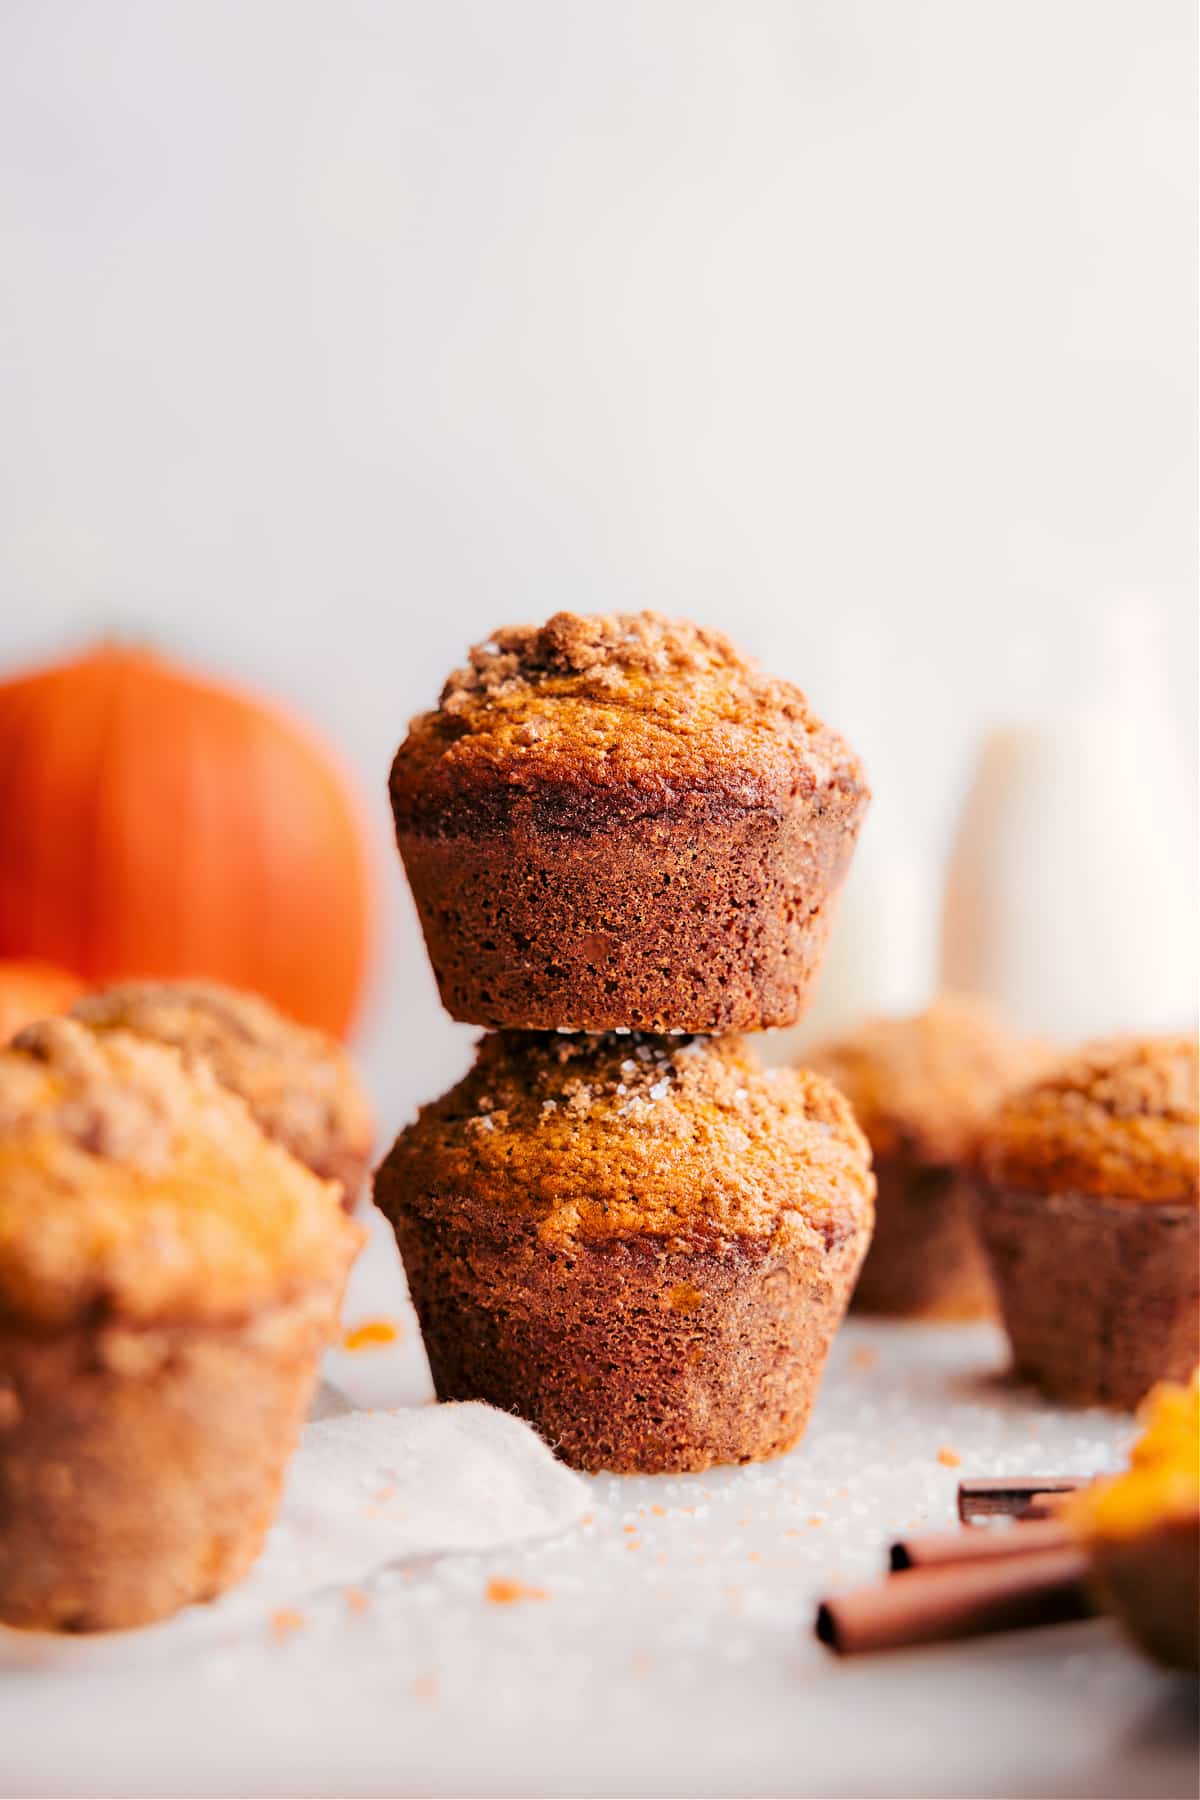 A batch of freshly baked pumpkin muffins, golden and risen, straight from the oven.